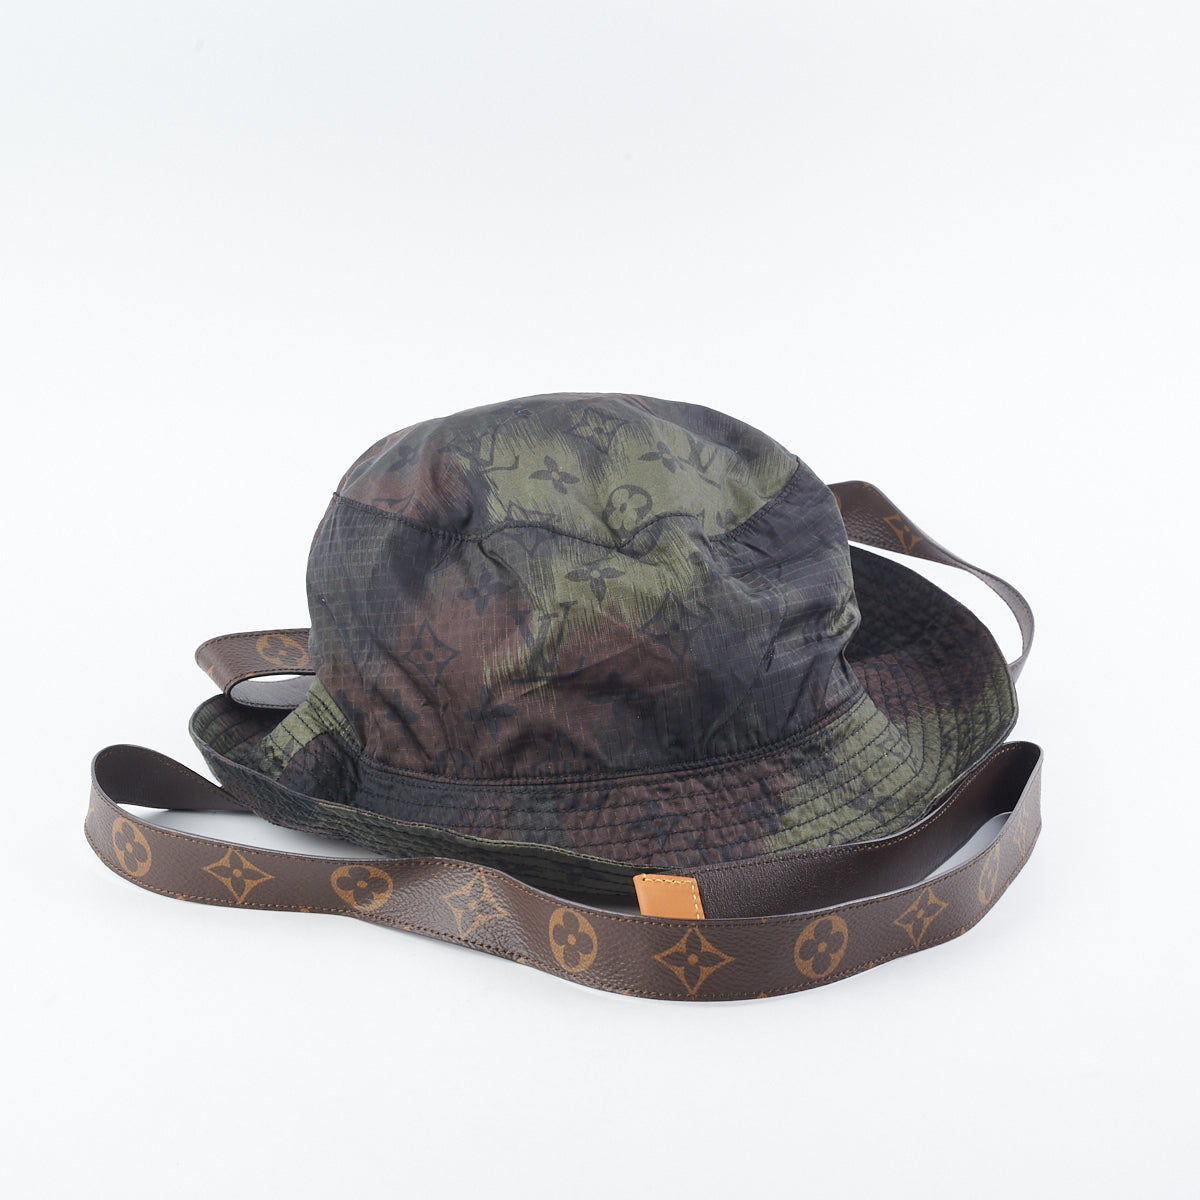 hat, lv, louis vuitton, bucket hat, swag, trill, make-up - Wheretoget